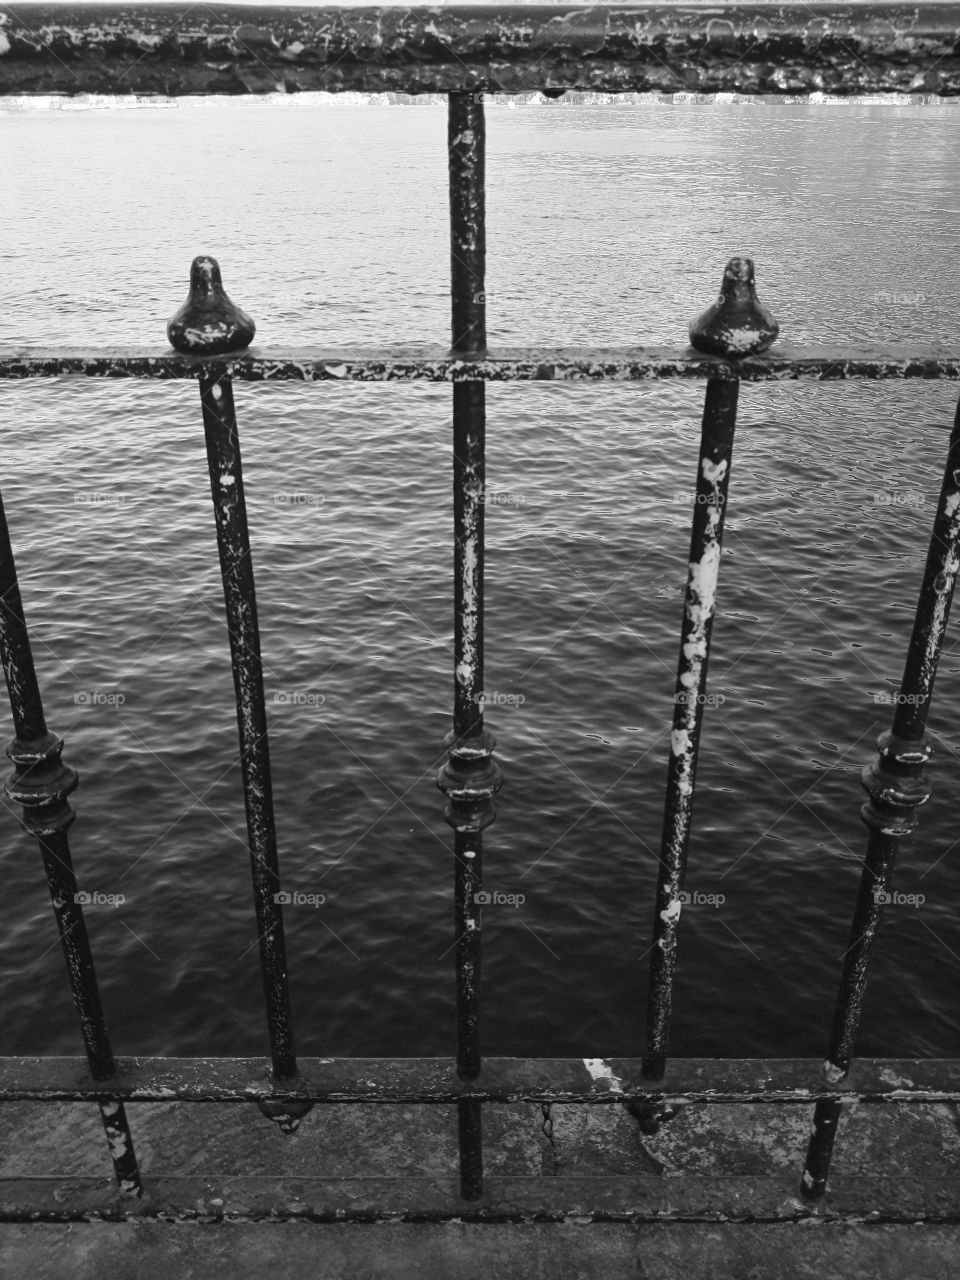 watch the water through the bars sitting